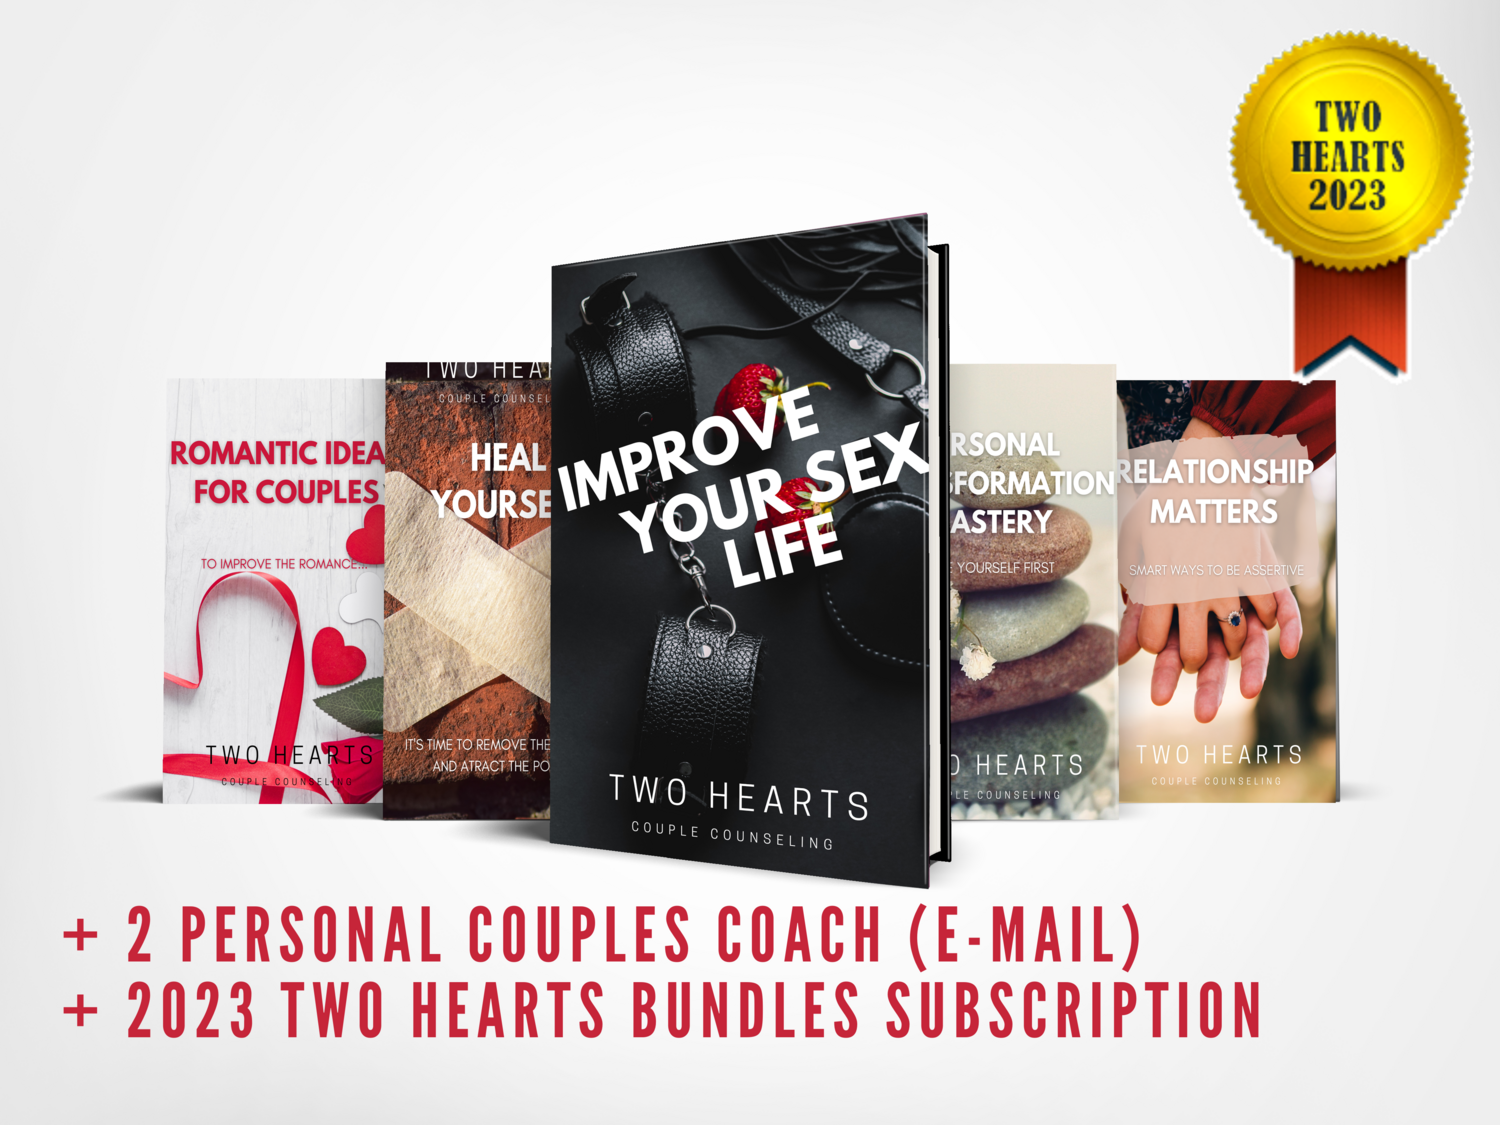 GOLDEN ROSES PACK - Boost your Relationship Valentine's Bundle e-books + 2 Personal Coach (by e-mail) + 2023 Two Hearts Bundles subscription